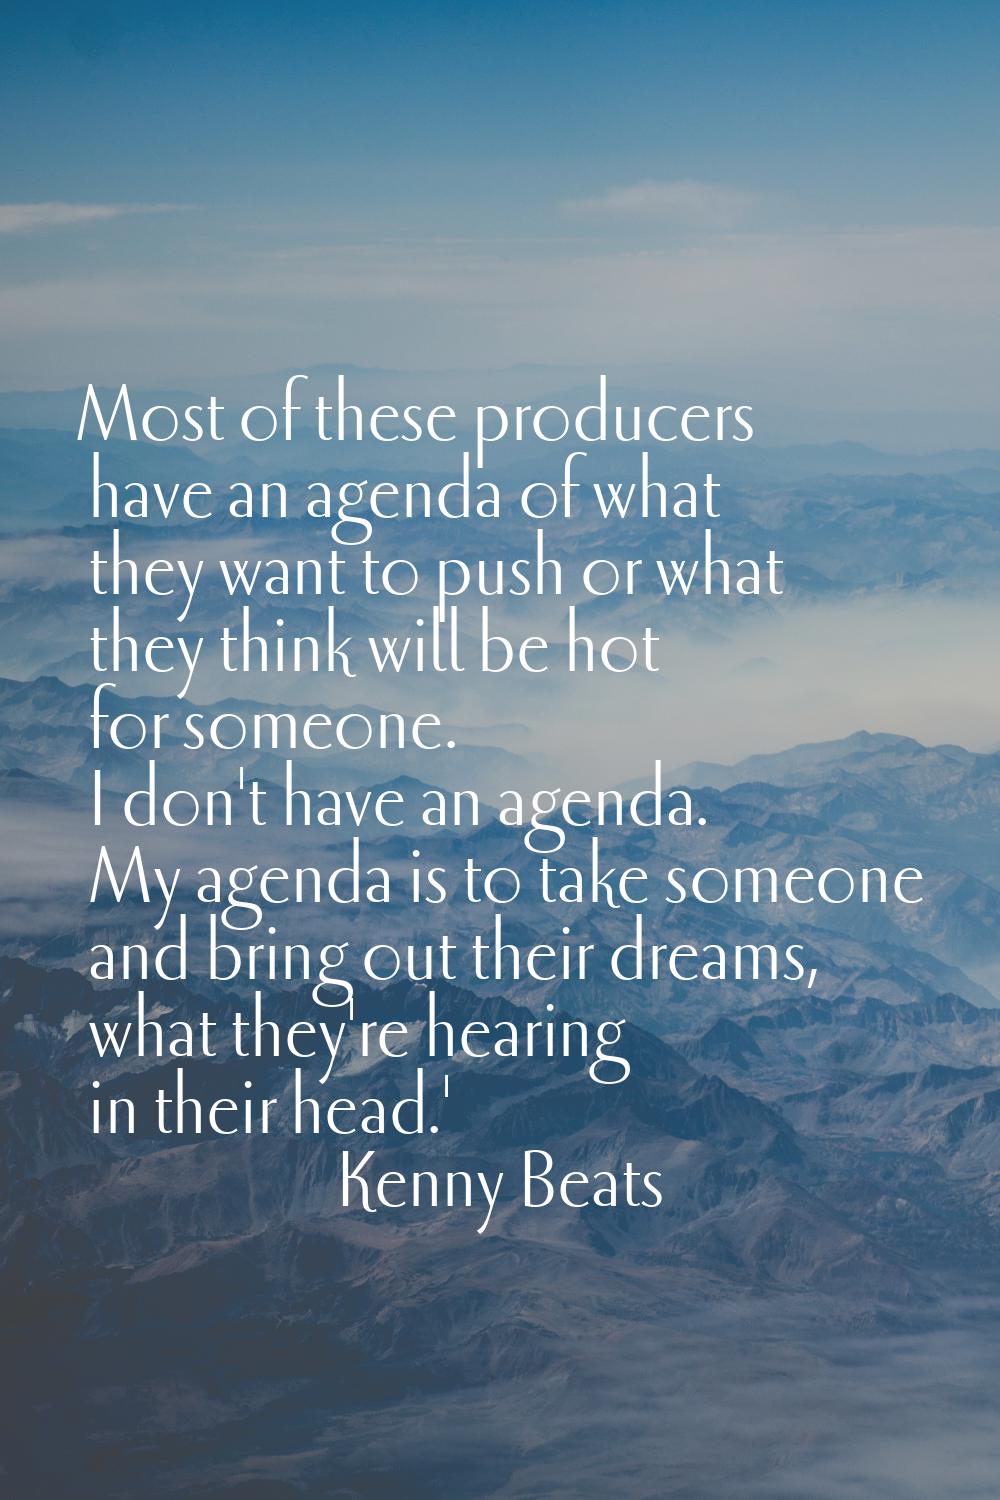 Most of these producers have an agenda of what they want to push or what they think will be hot for